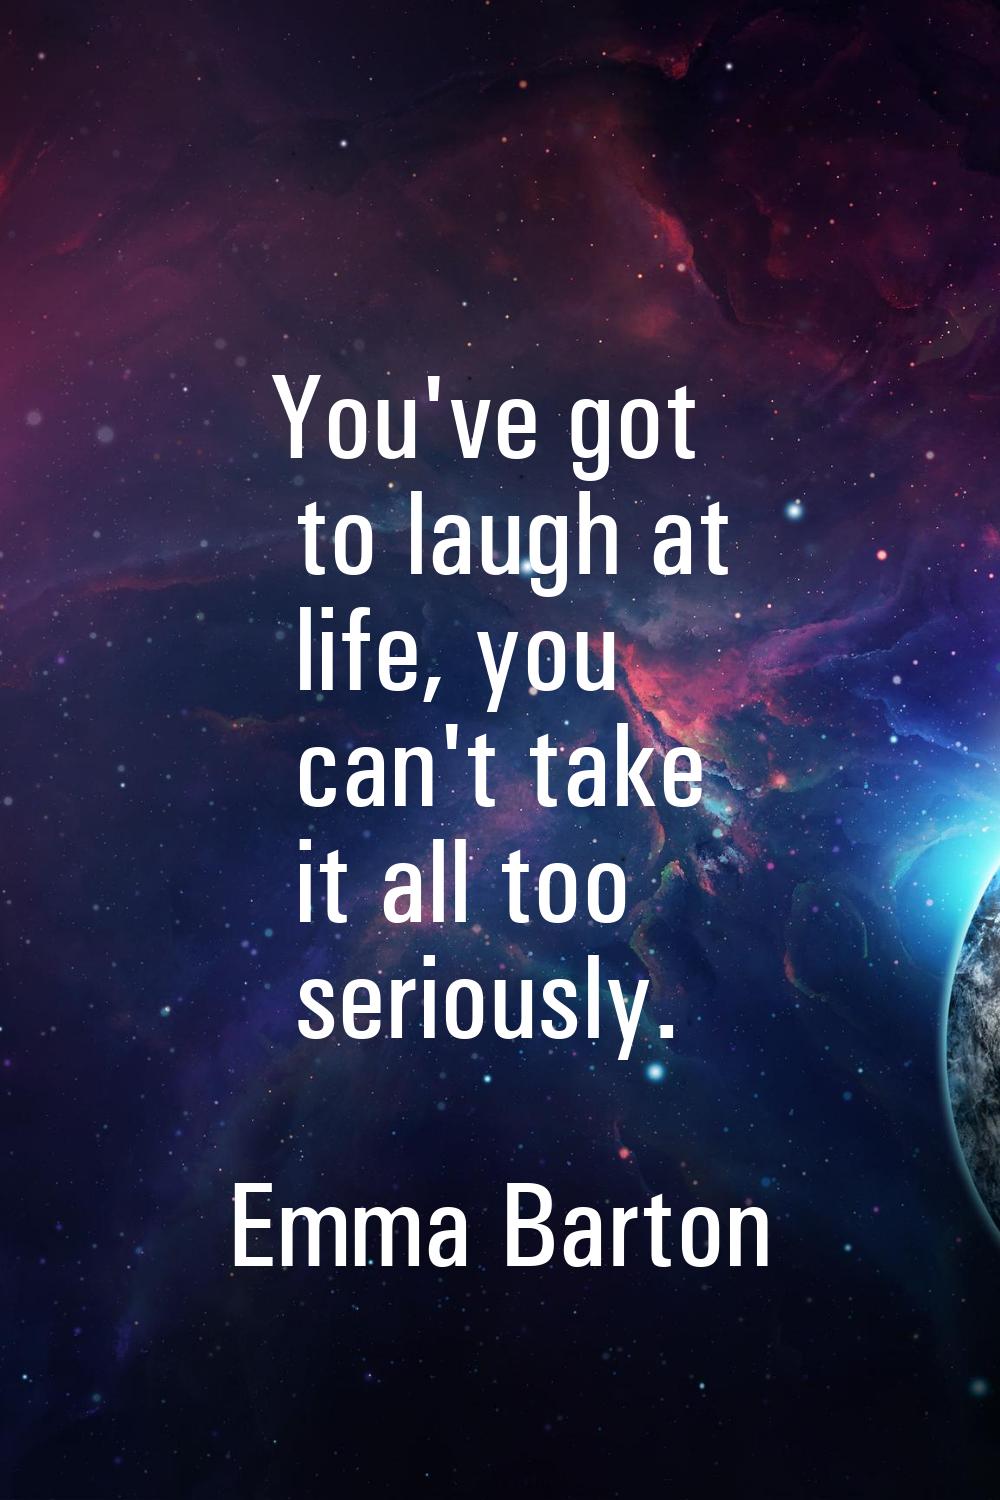 You've got to laugh at life, you can't take it all too seriously.